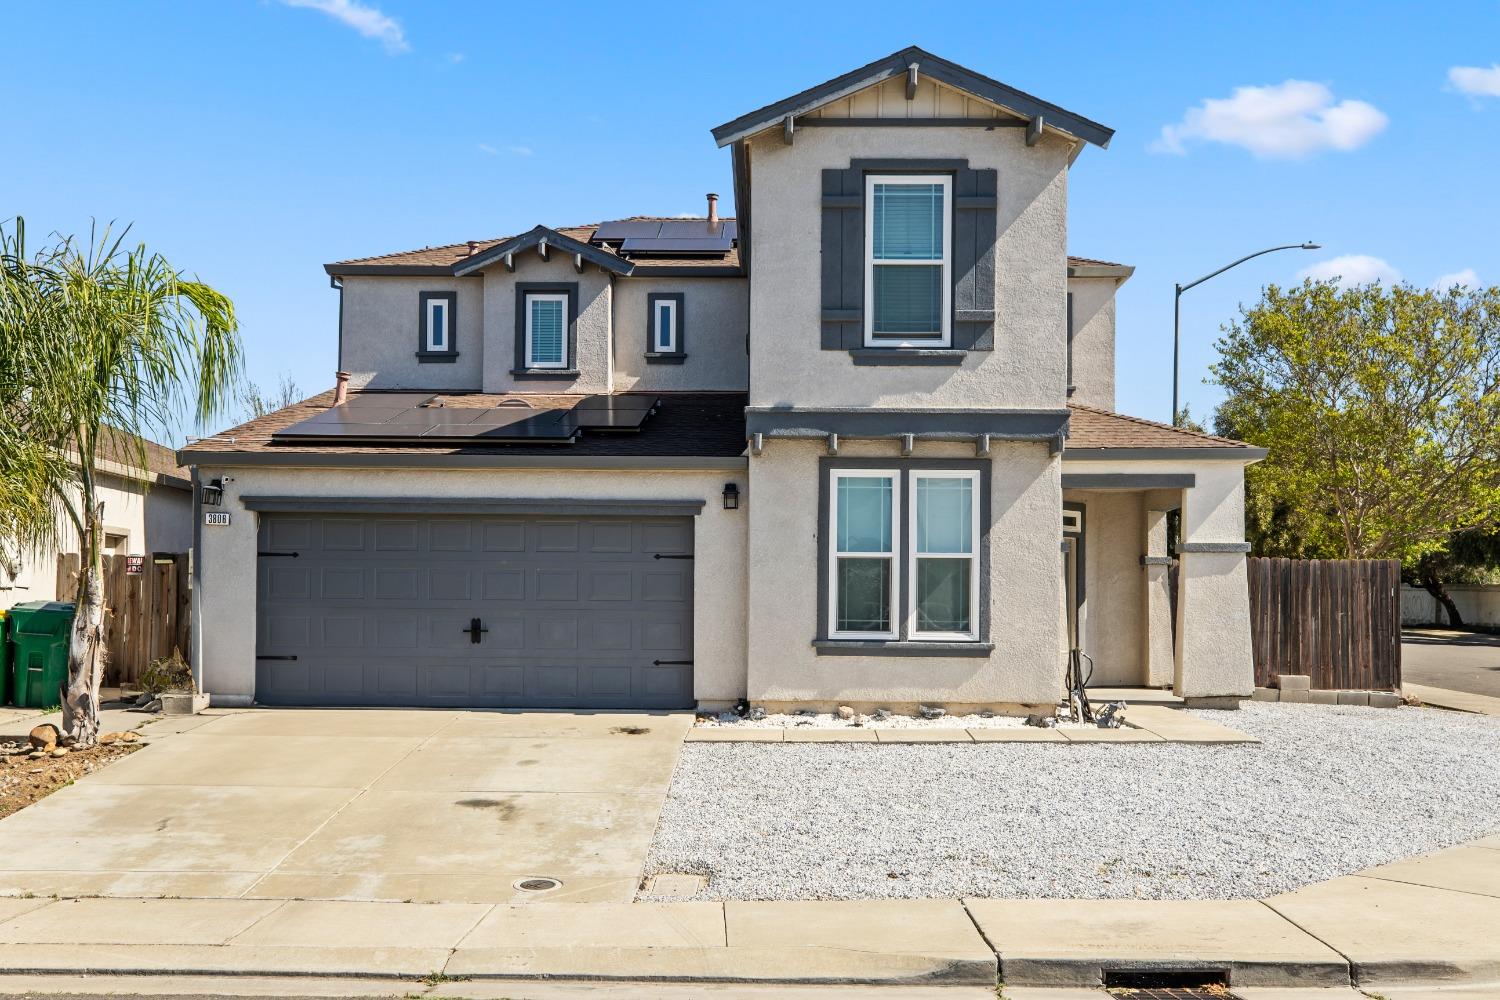 Photo of 3806 Oak Forest Ave in Stockton, CA